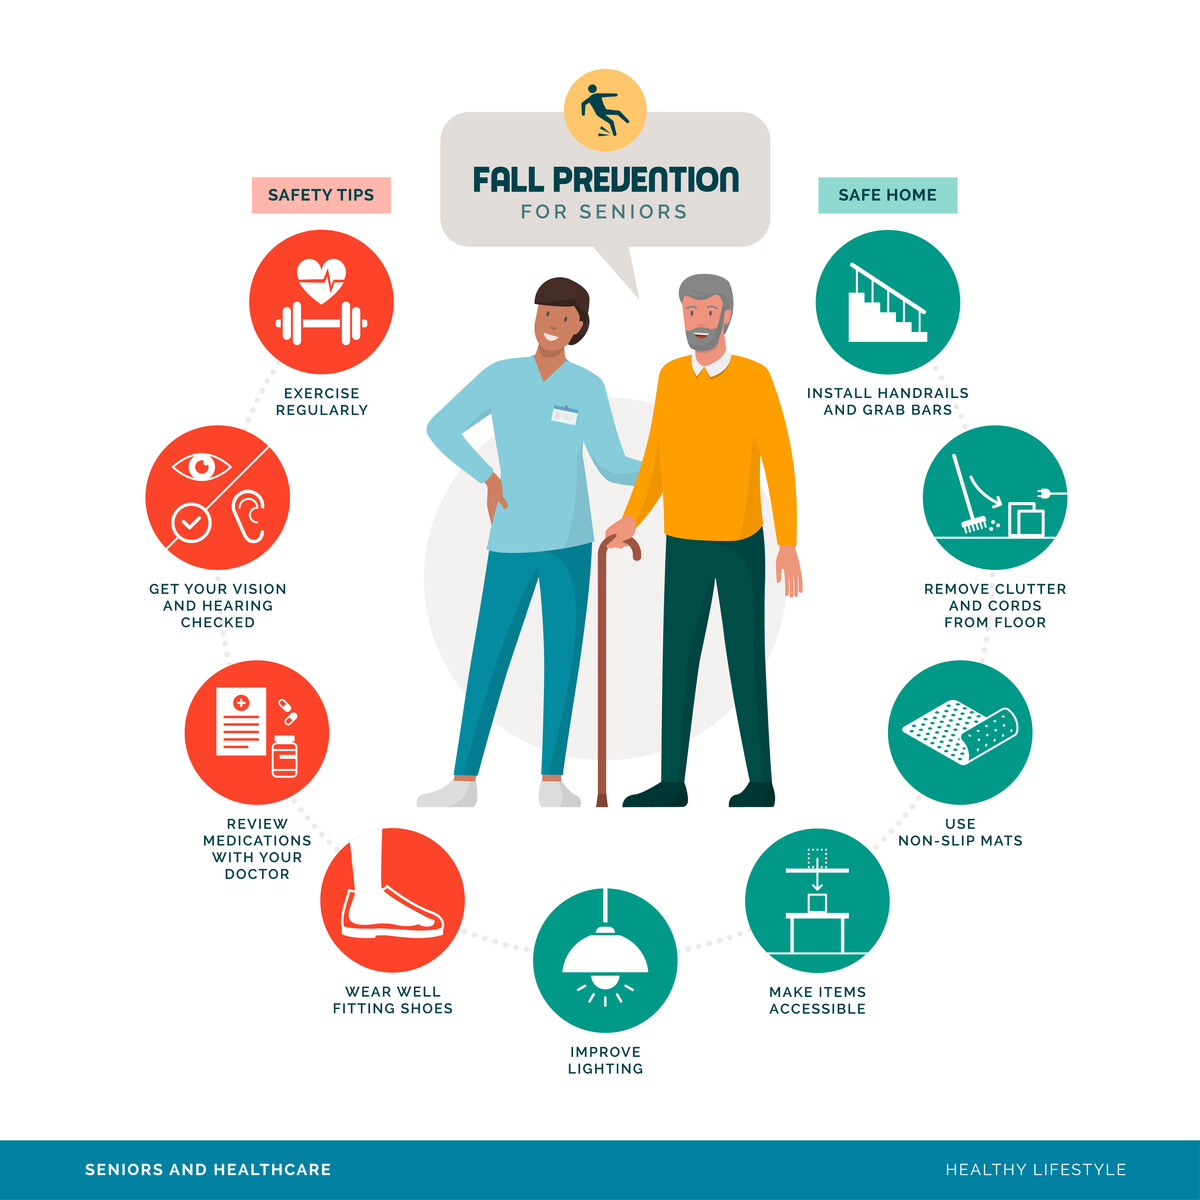 Fall Prevention and Reduction Strategies for Seniors | The Osborn NY